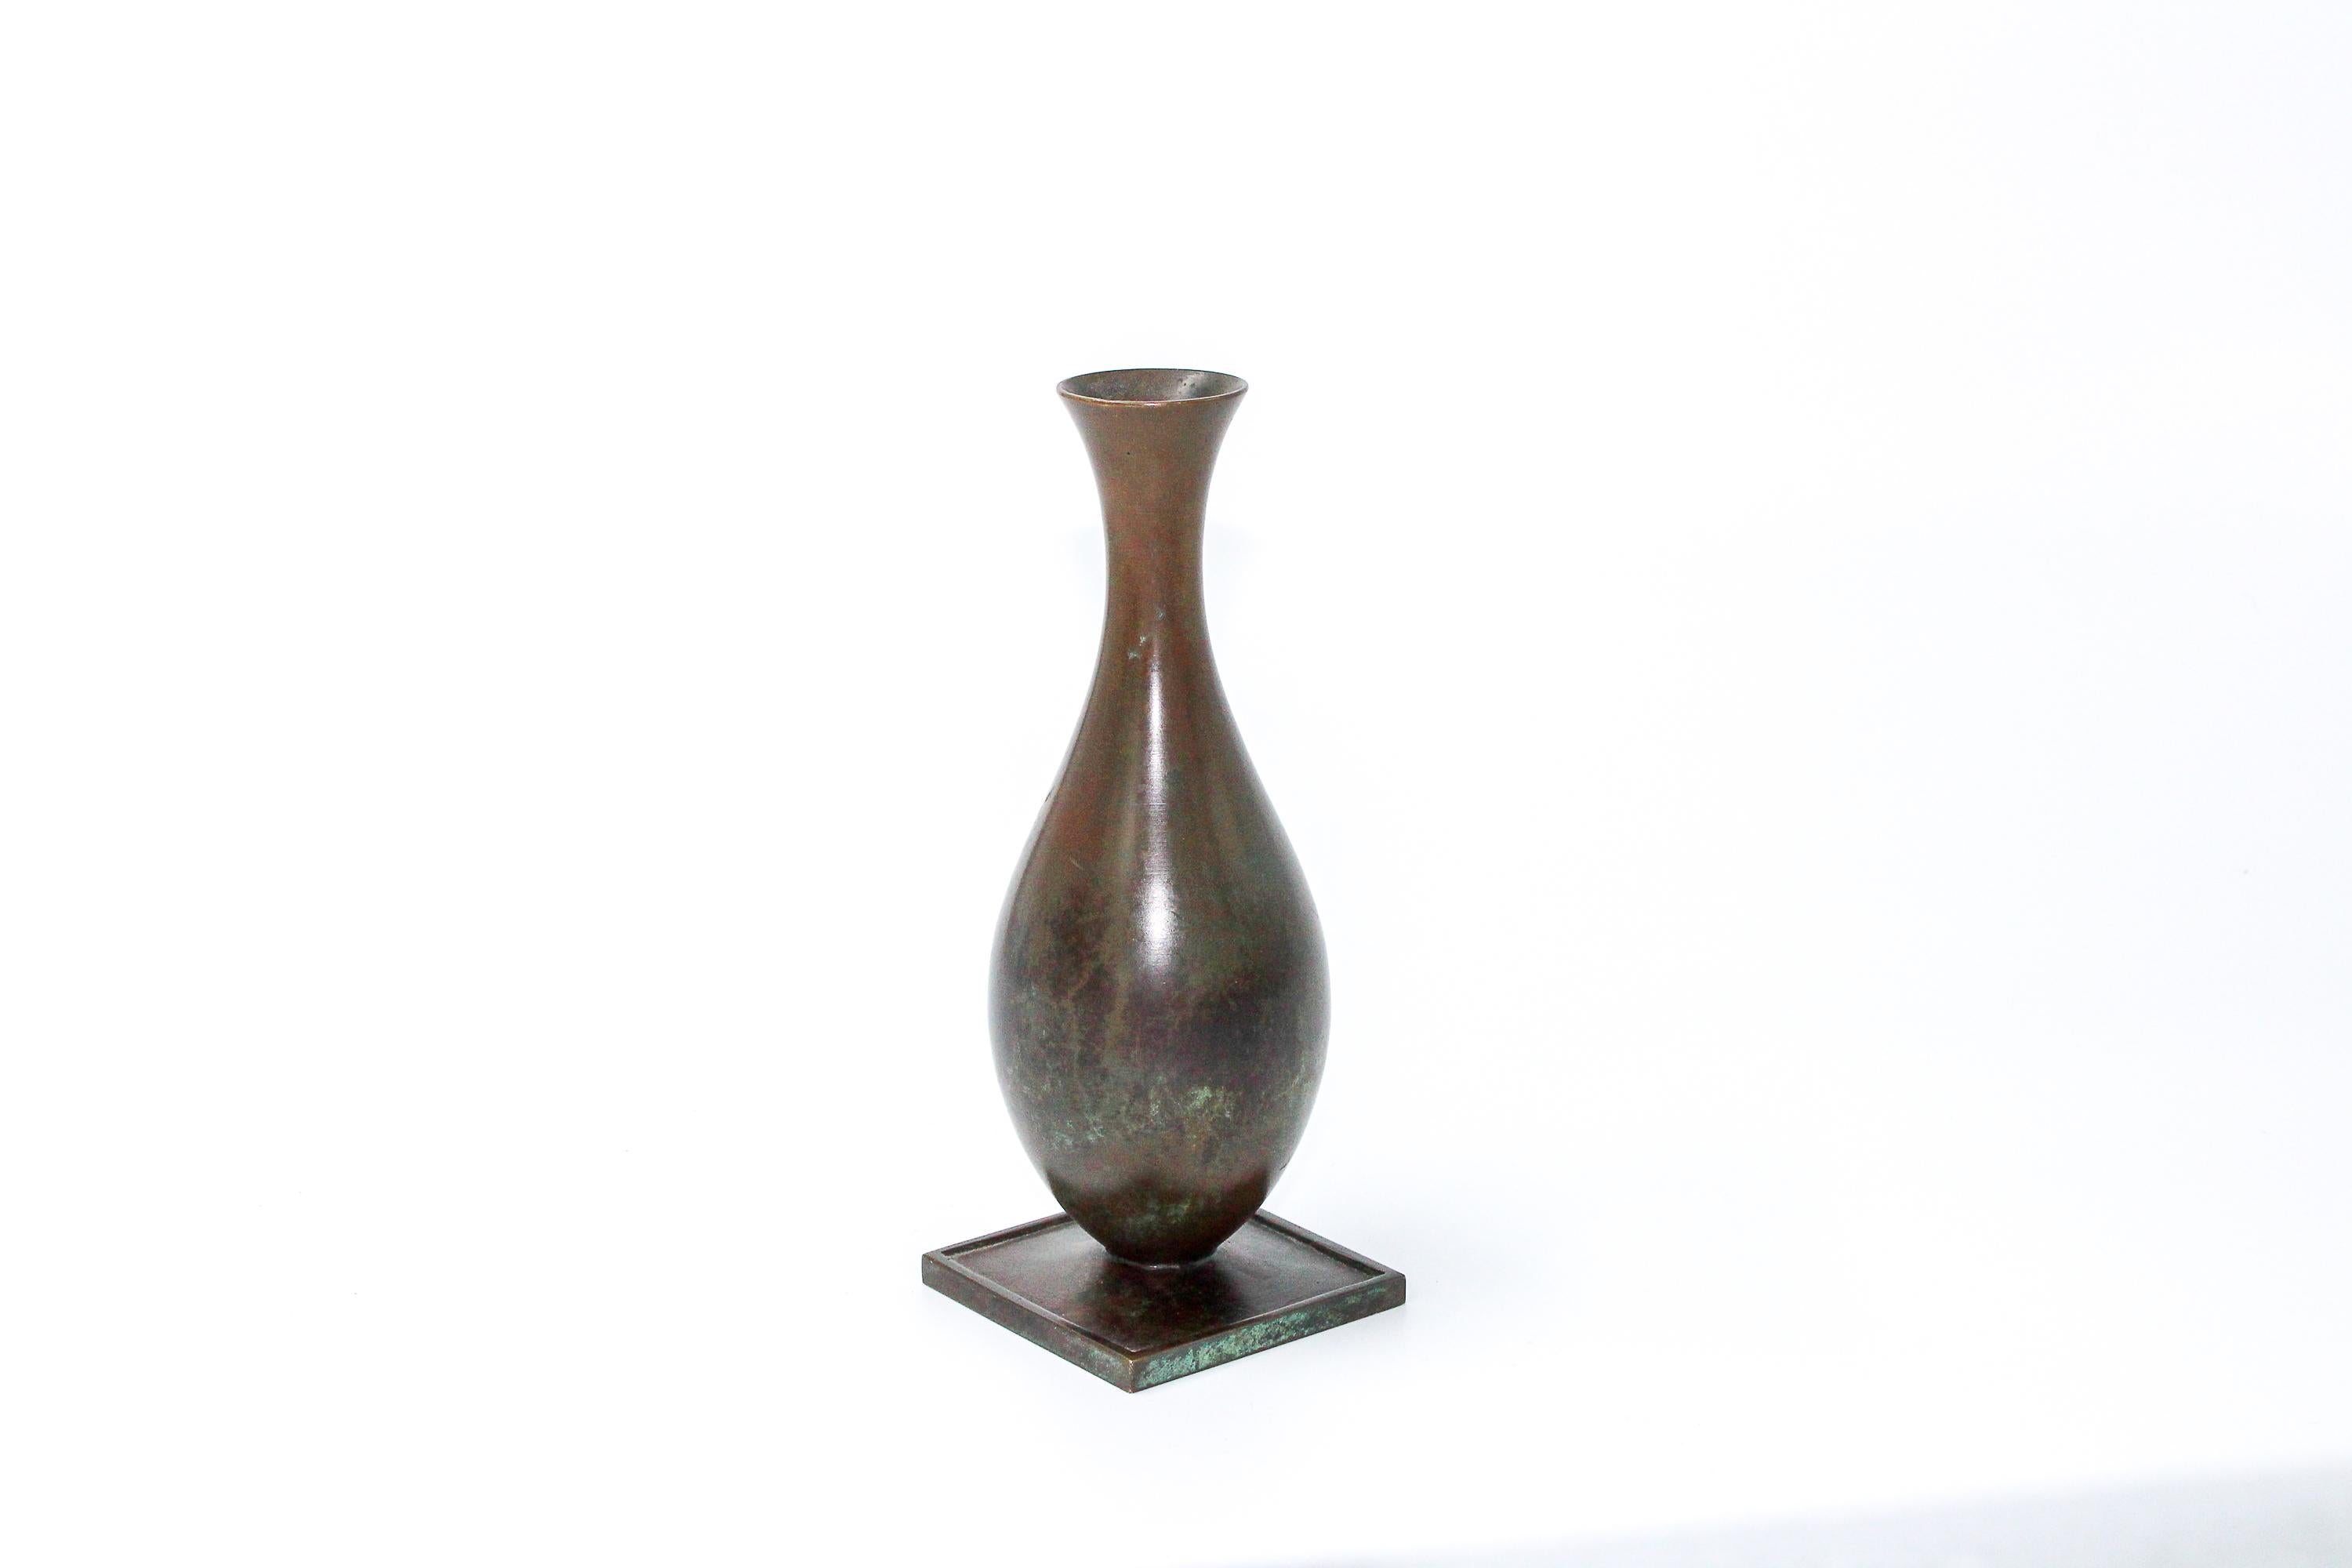 A 1930s bronze vase by Swedish manufacturer GAB with beautiful patina. A very decorative Art Deco vase. Good vintage condition with patina.